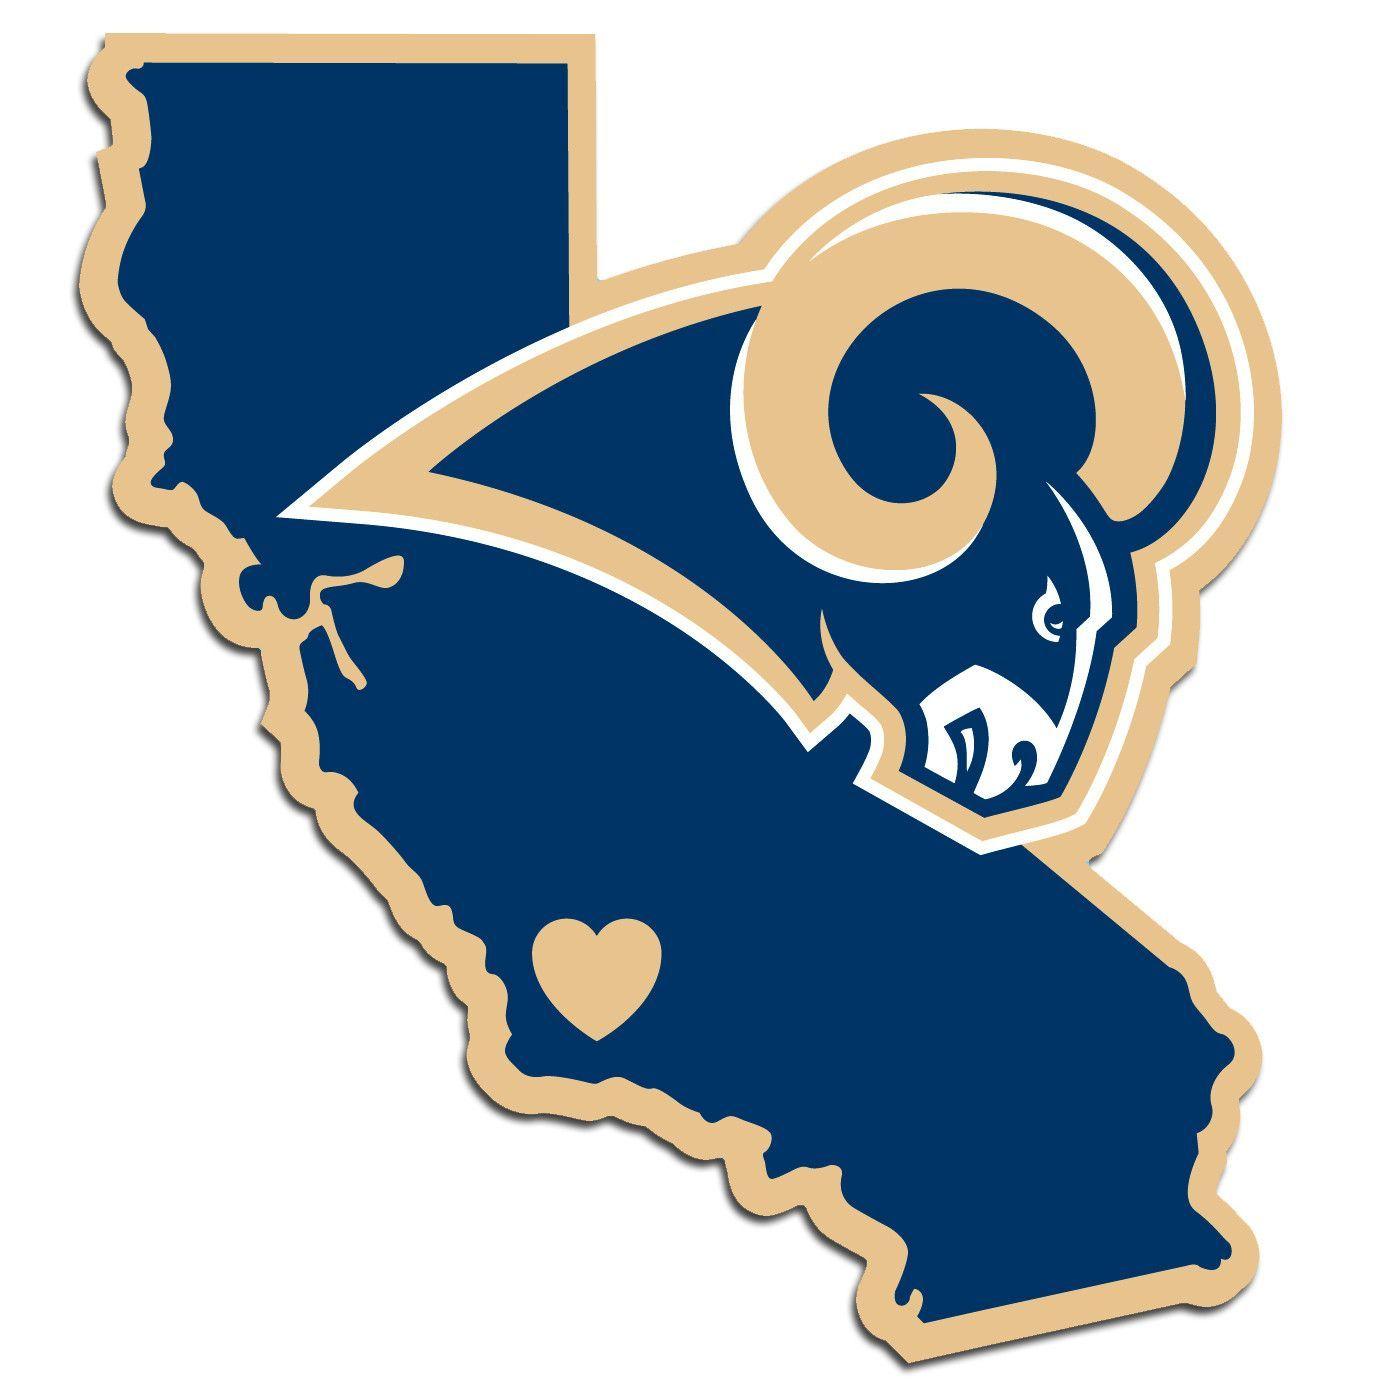 Los Angeles Rams Logo - It's a home state decal with a sporty twist! This Los Angeles Rams ...